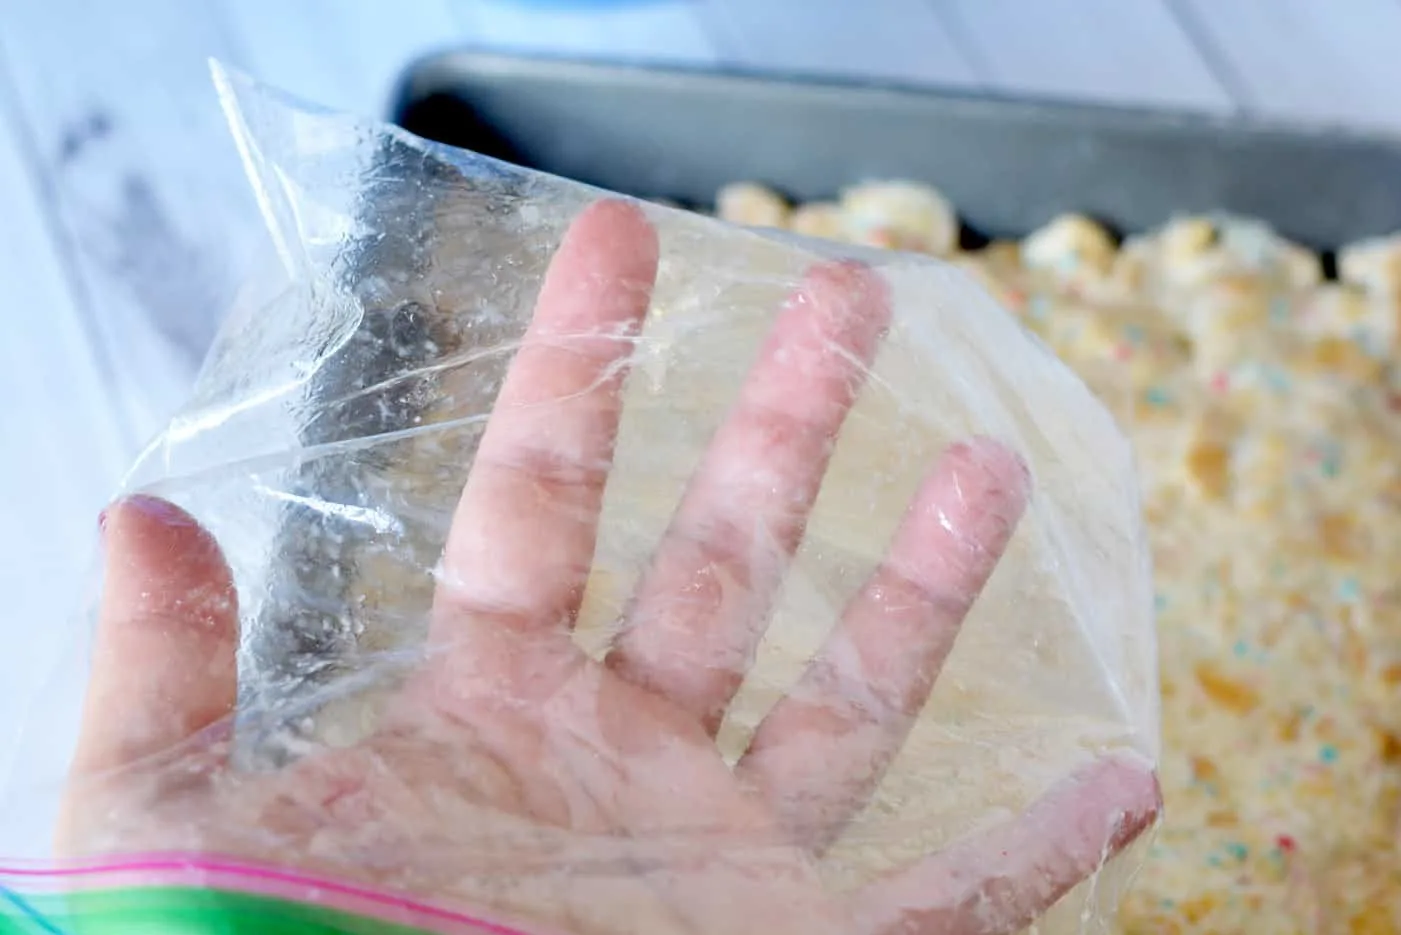 Hand with a sandwich bag on it